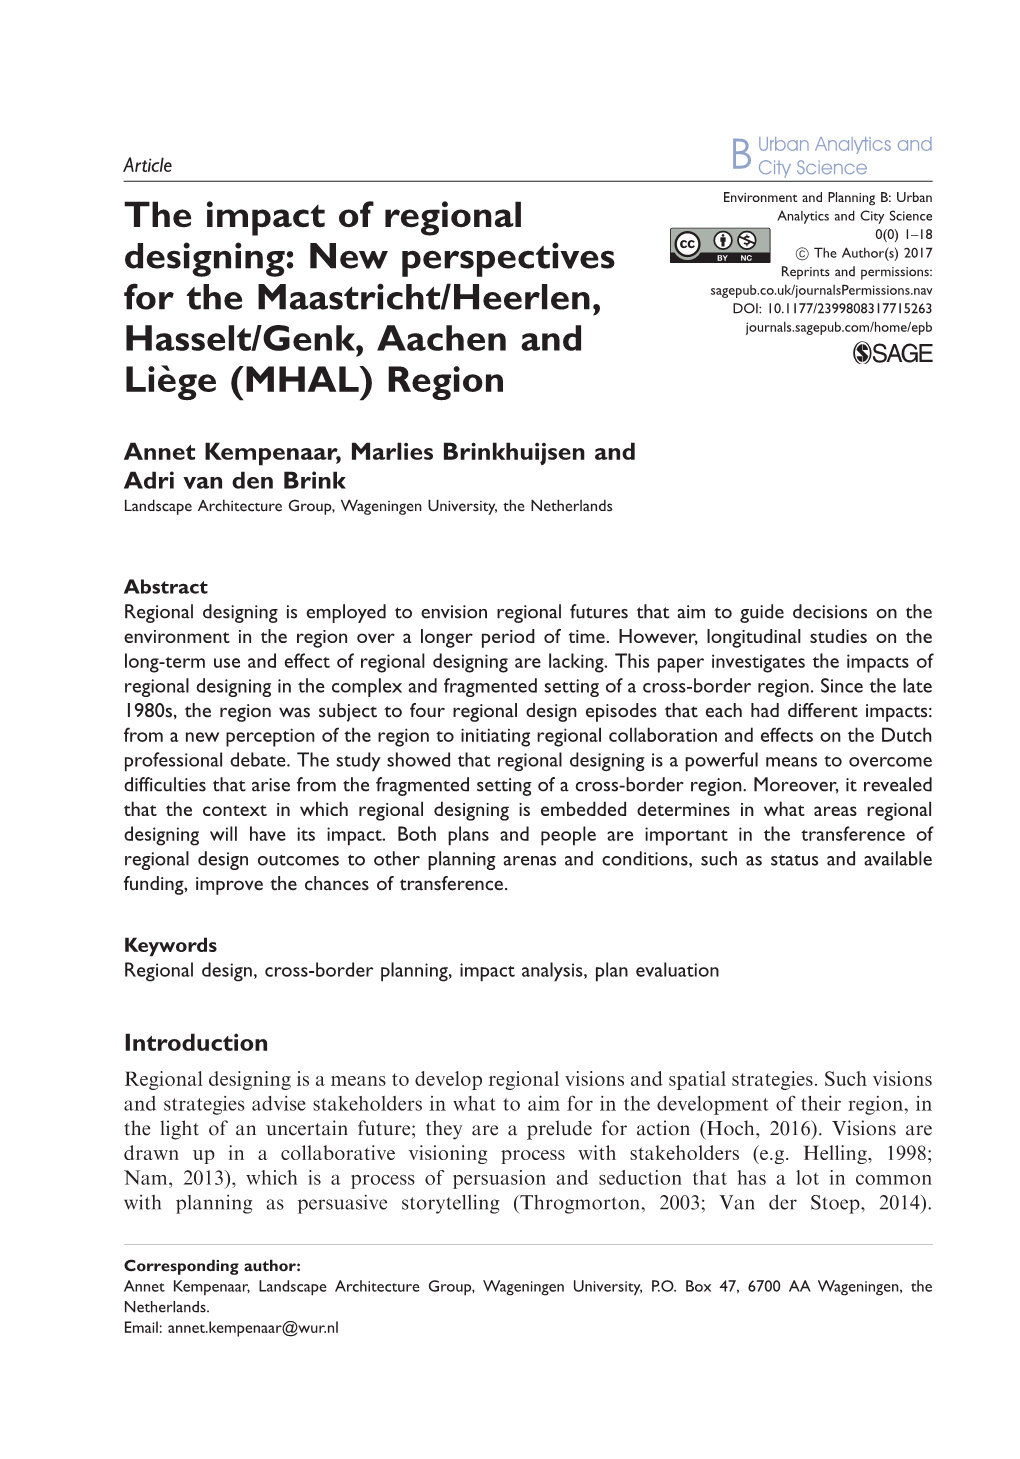 The Impact of Regional Designing: New Perspectives for the Maastricht